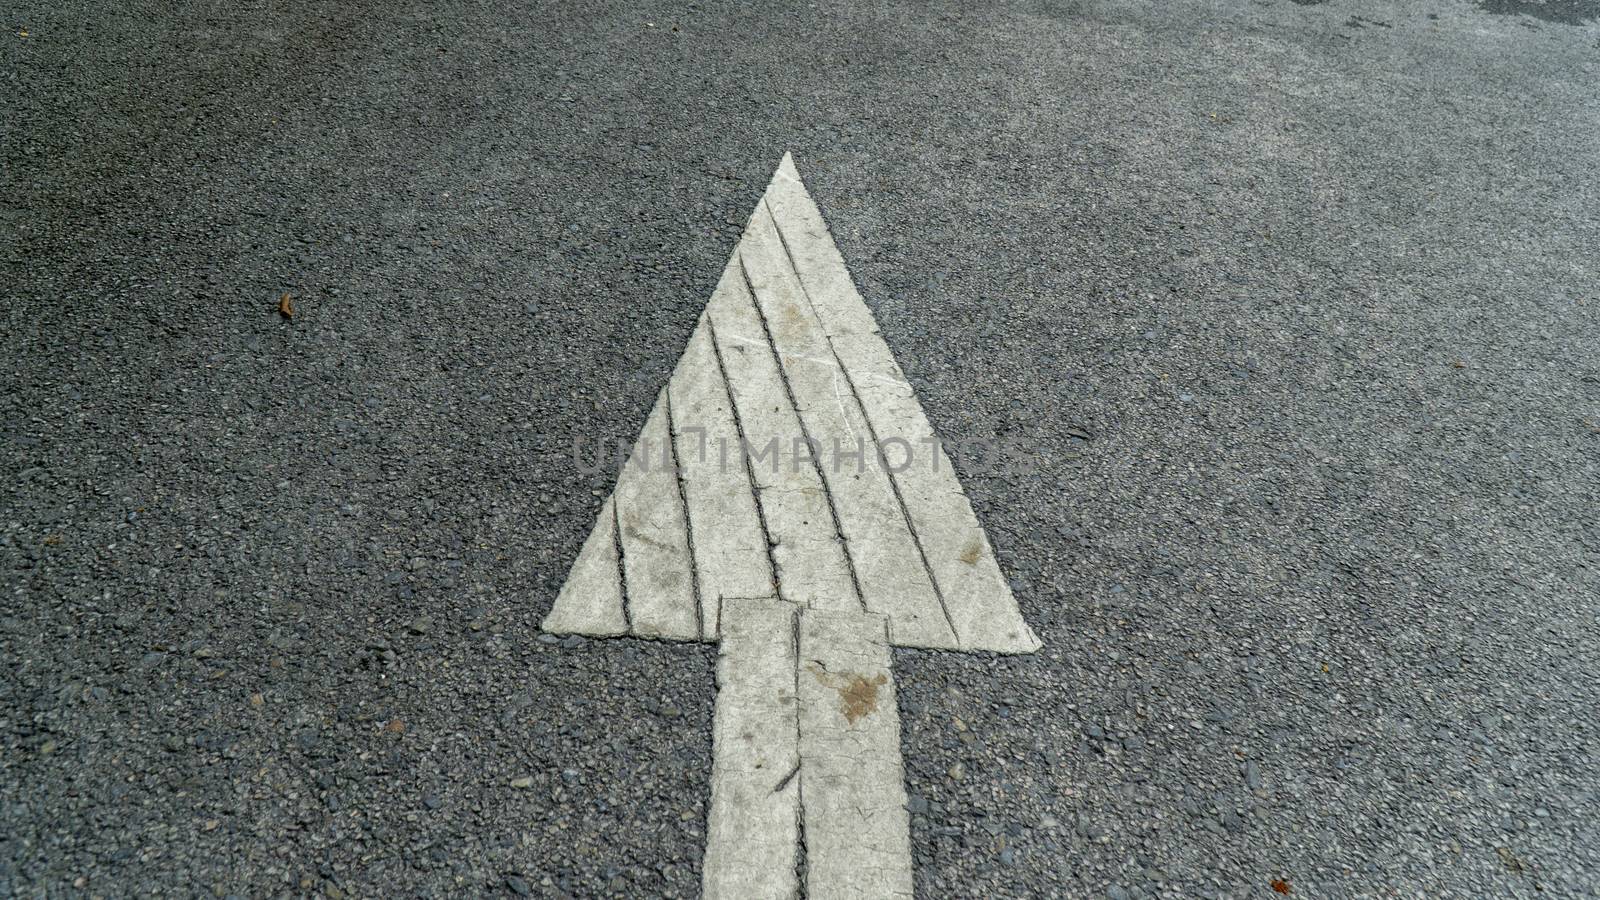 A white arrow painted sign on a gray paved road pointing the direction the car was supposed to drive.